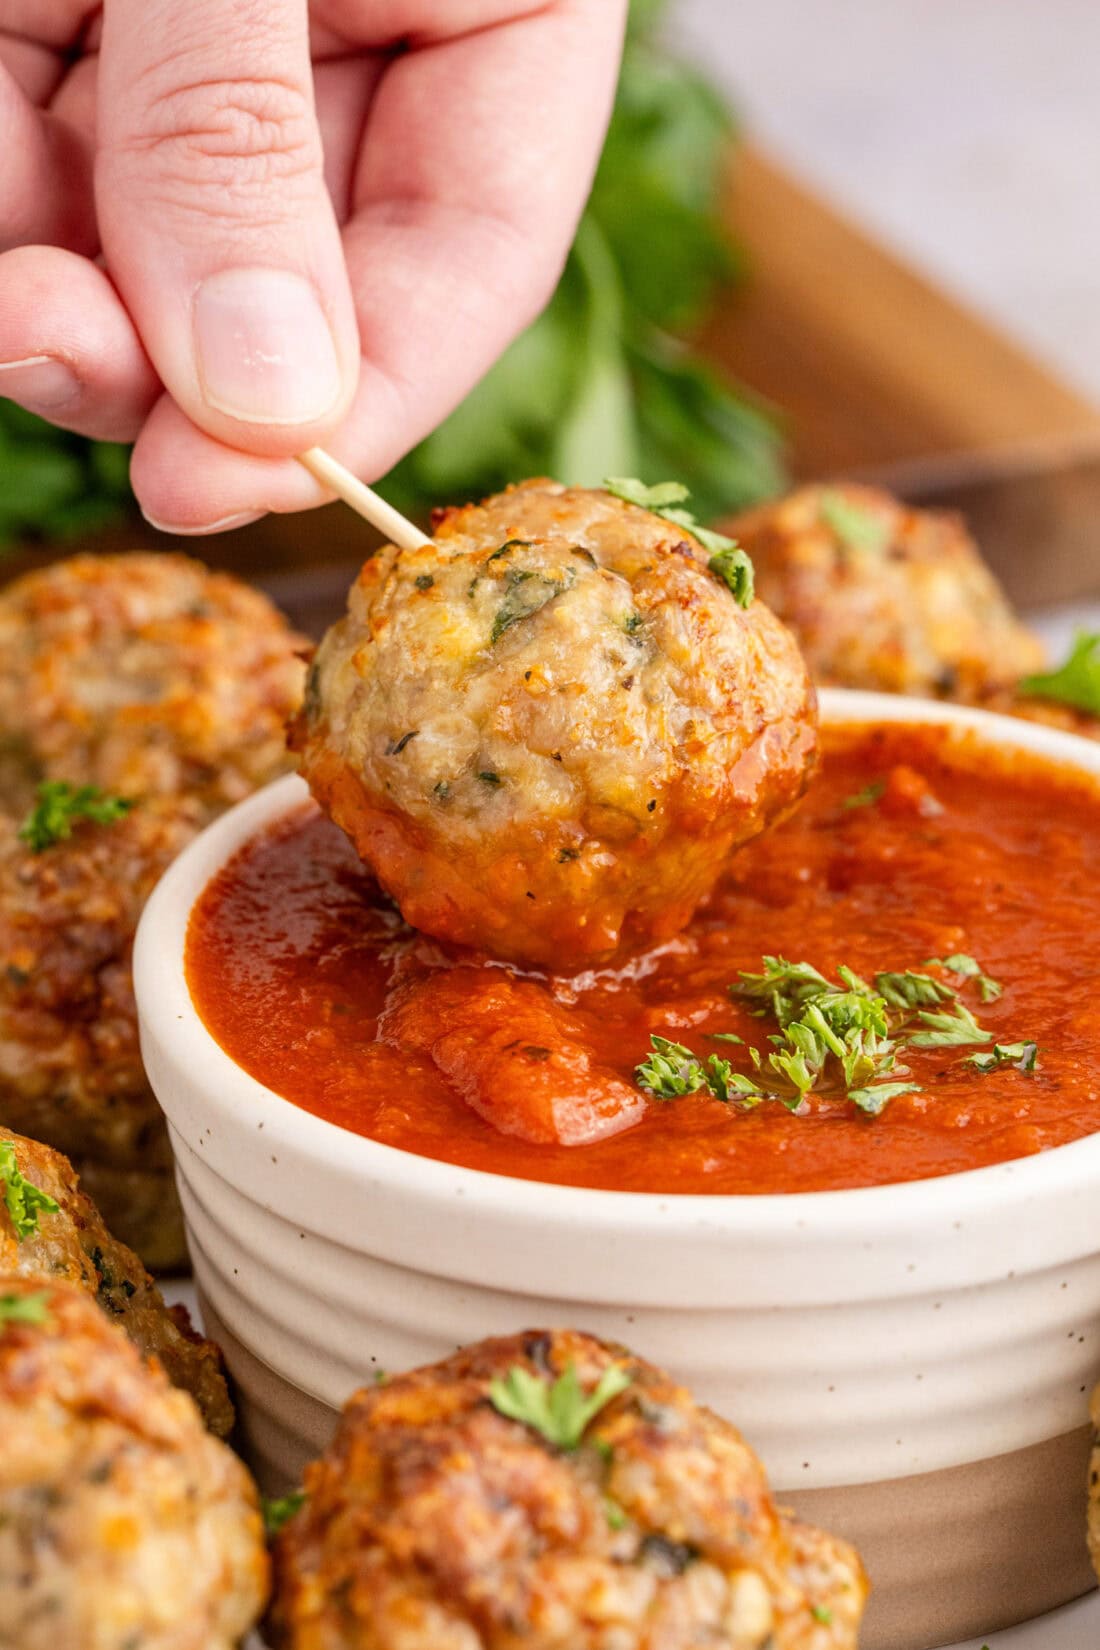 Chicken Meatball being dipped in marinara sauce